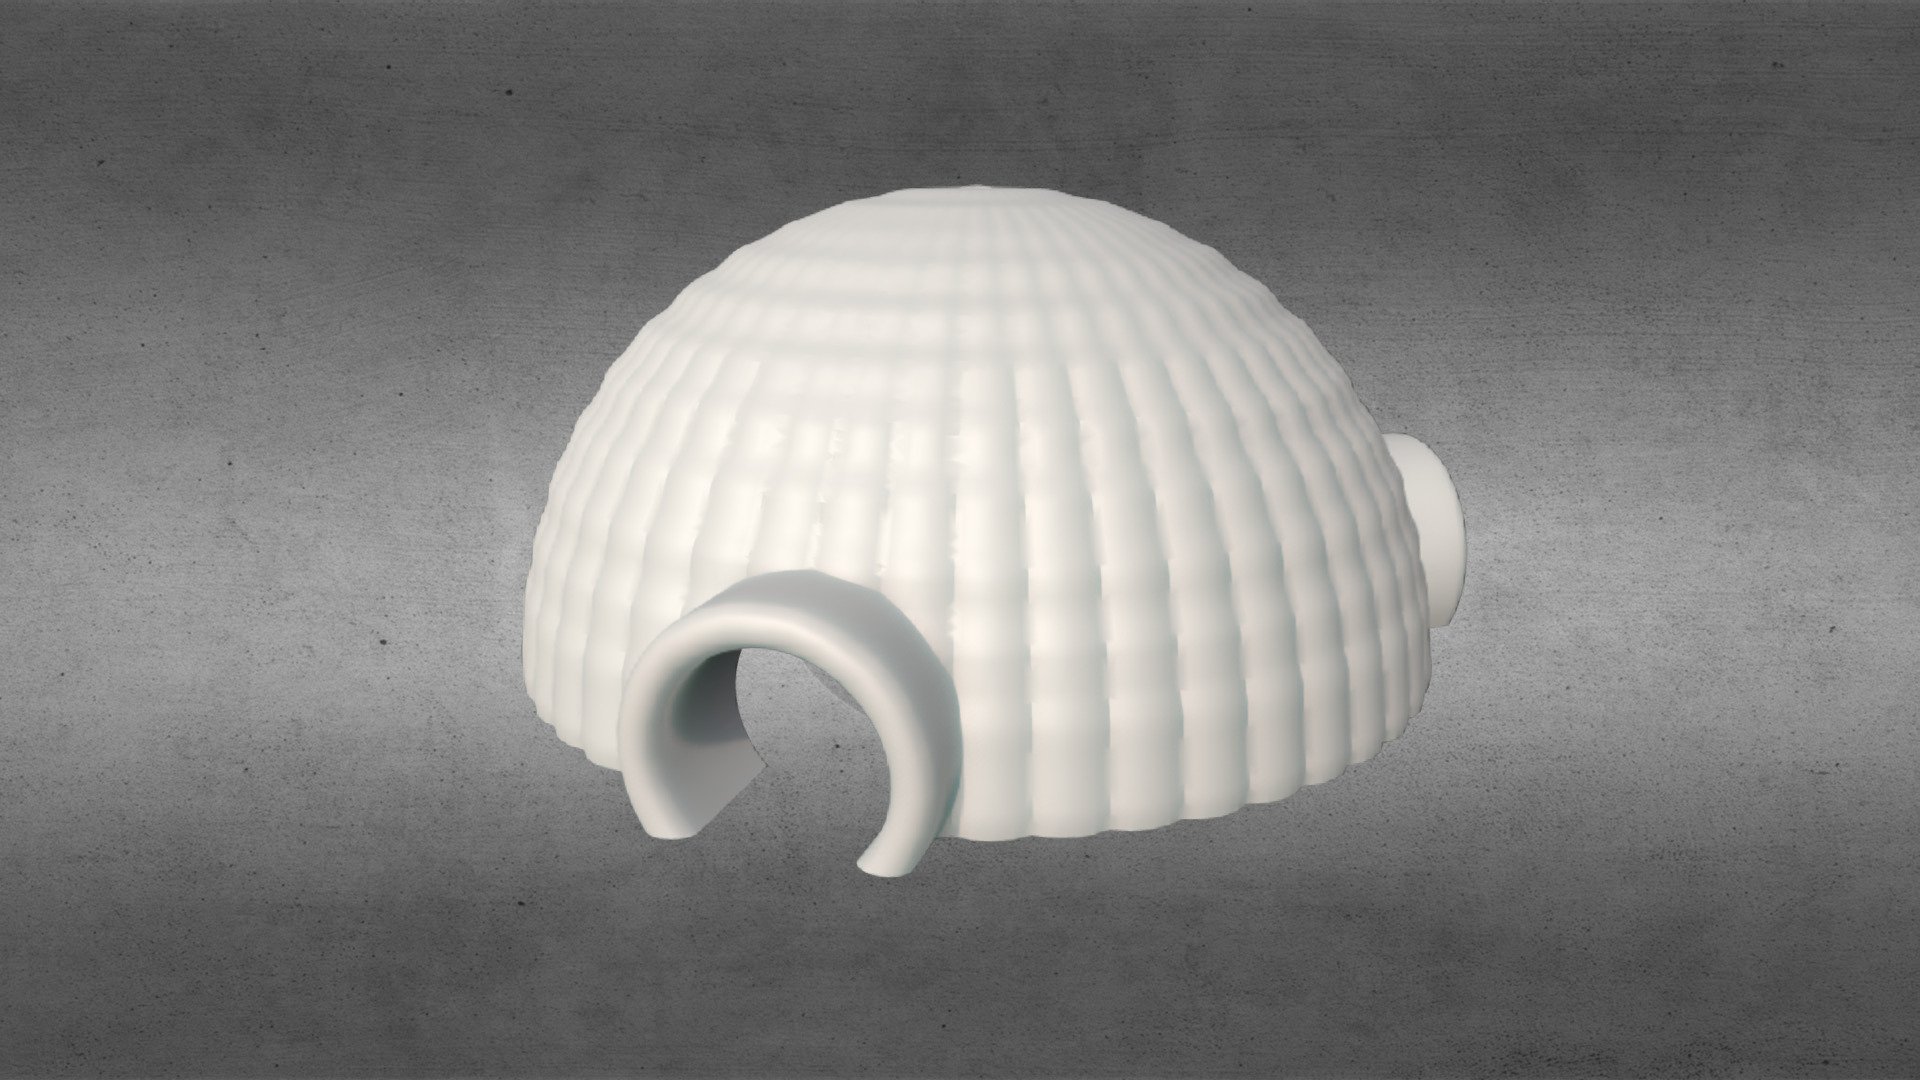 3D CAD model of large inflatable dome for outdoor events
3D printable watertight model - 3D CAD Large Inflatable Dome (3D Printable) - Buy Royalty Free 3D model by ideabeans 3d model